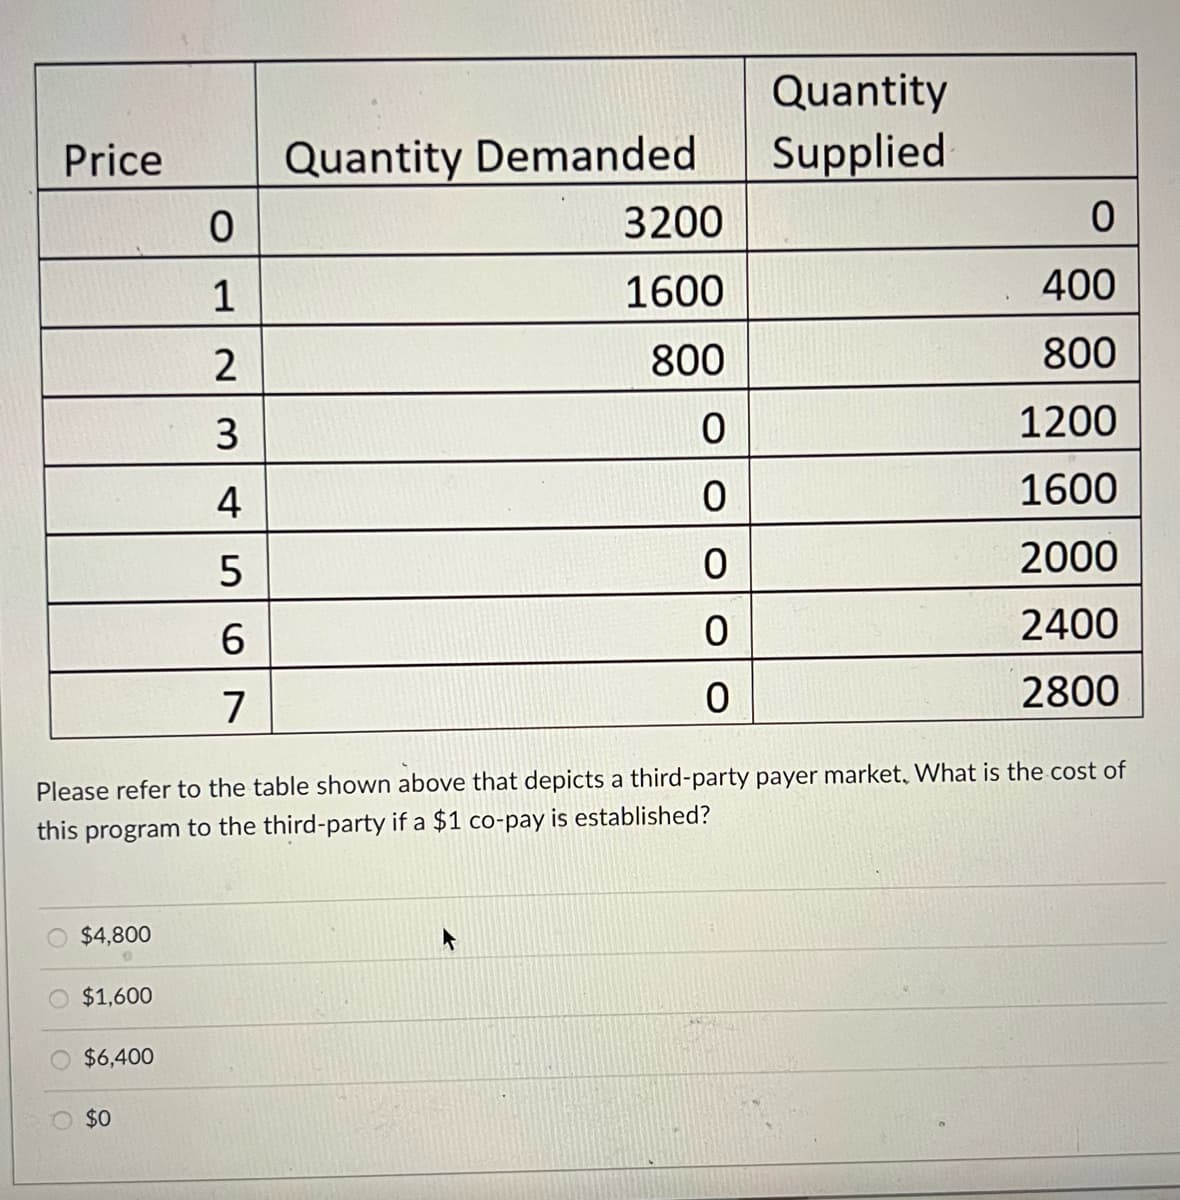 Quantity
Price
Quantity Demanded
Supplied
3200
1
1600
400
2
800
800
3
1200
4
1600
2000
2400
7
2800
Please refer to the table shown above that depicts a third-party payer market, What is the cost of
this program to the third-party if a $1 co-pay is established?
$4,800
$1,600
$6,400
$0
